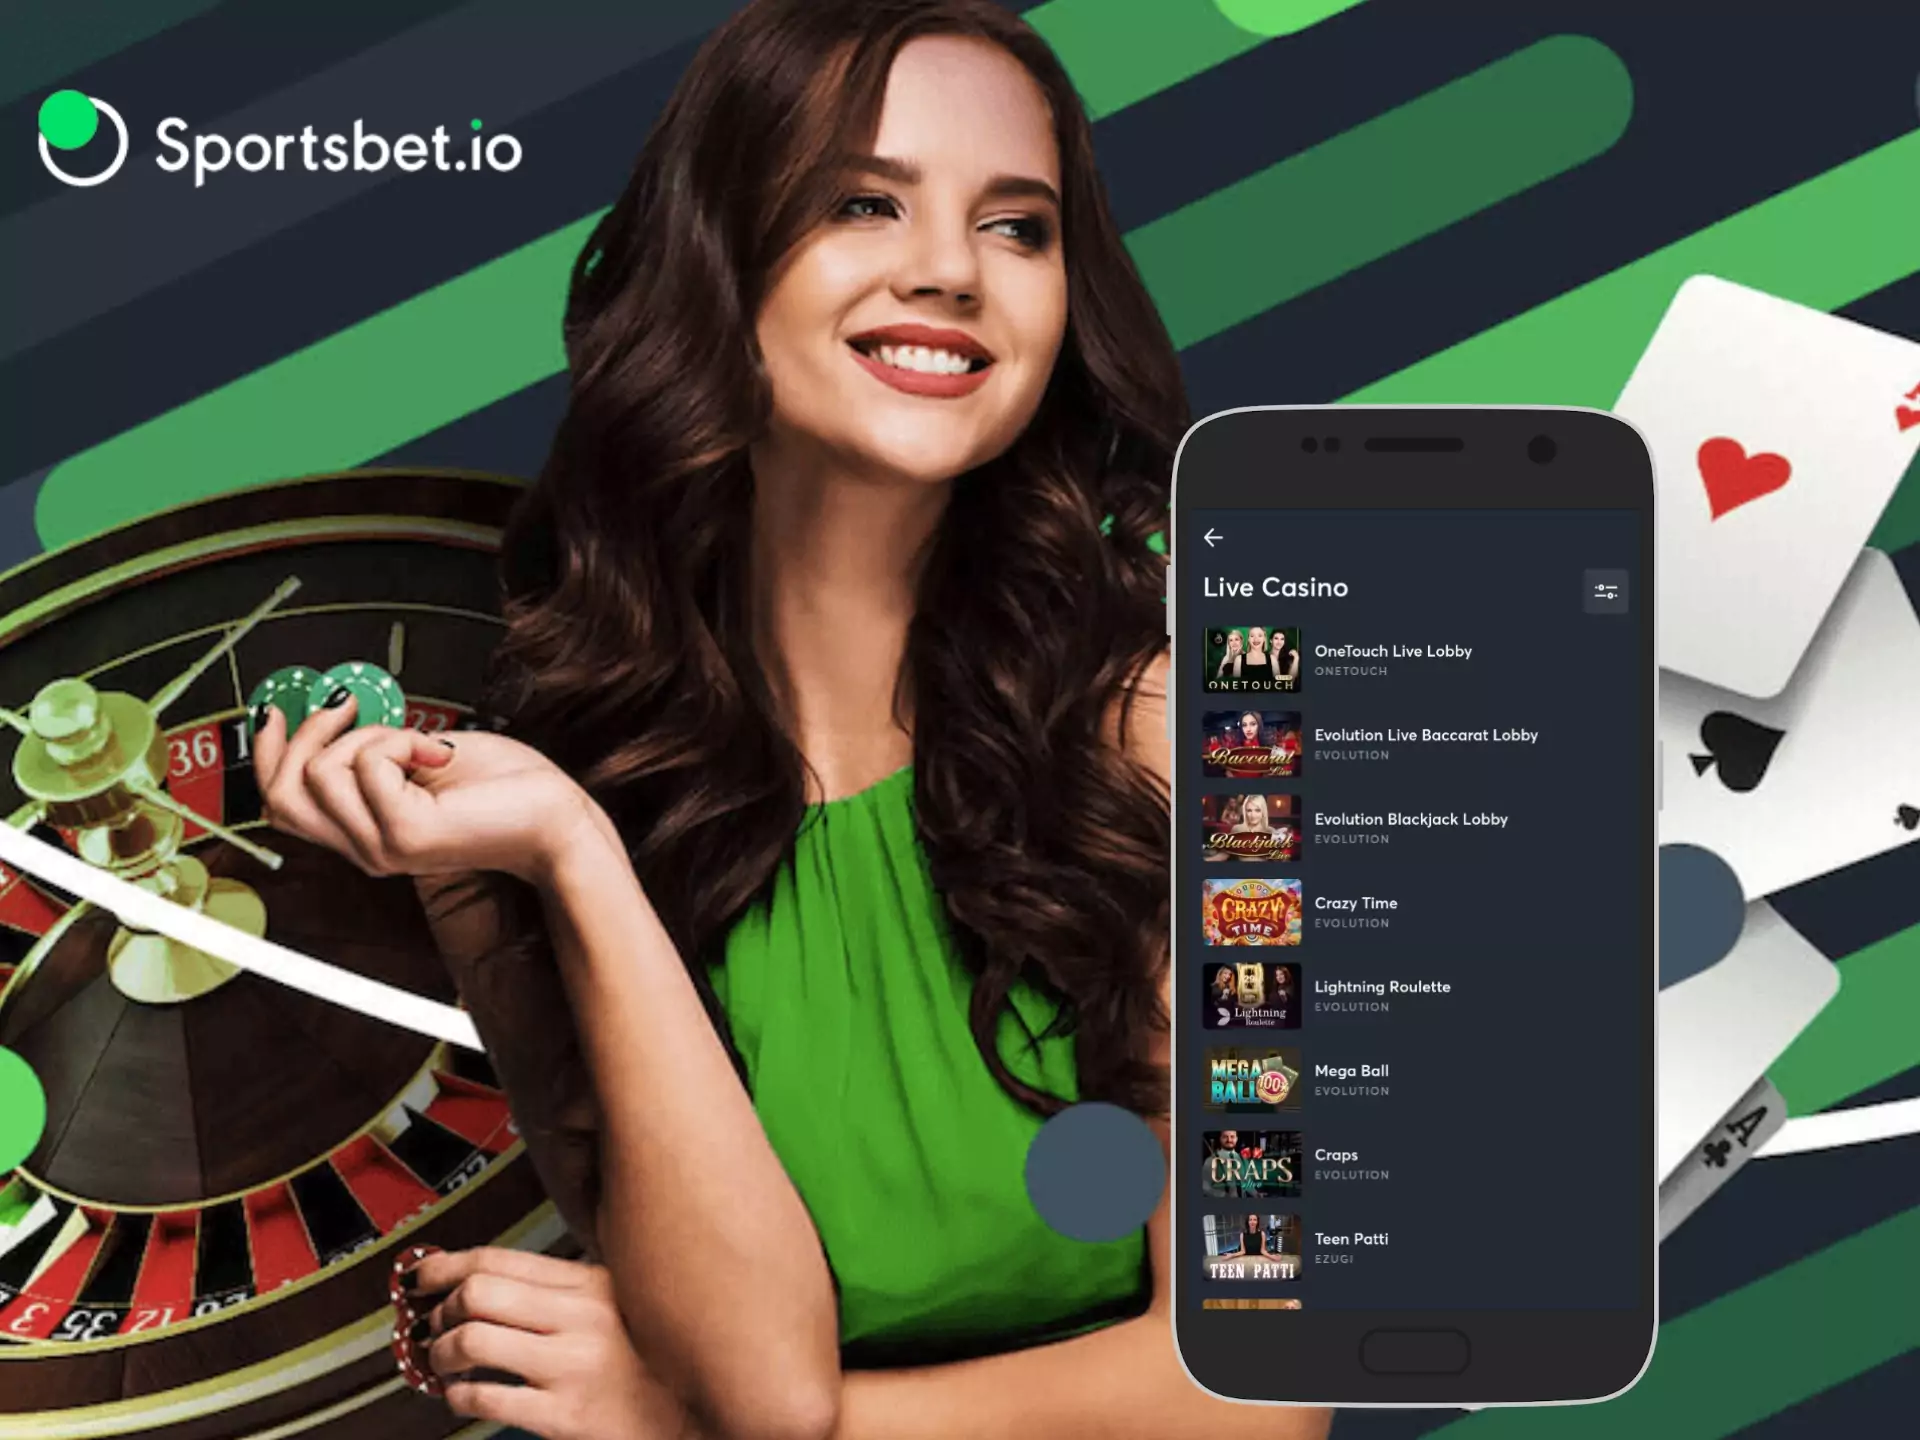 Try ro win a real dealer in live casino games.